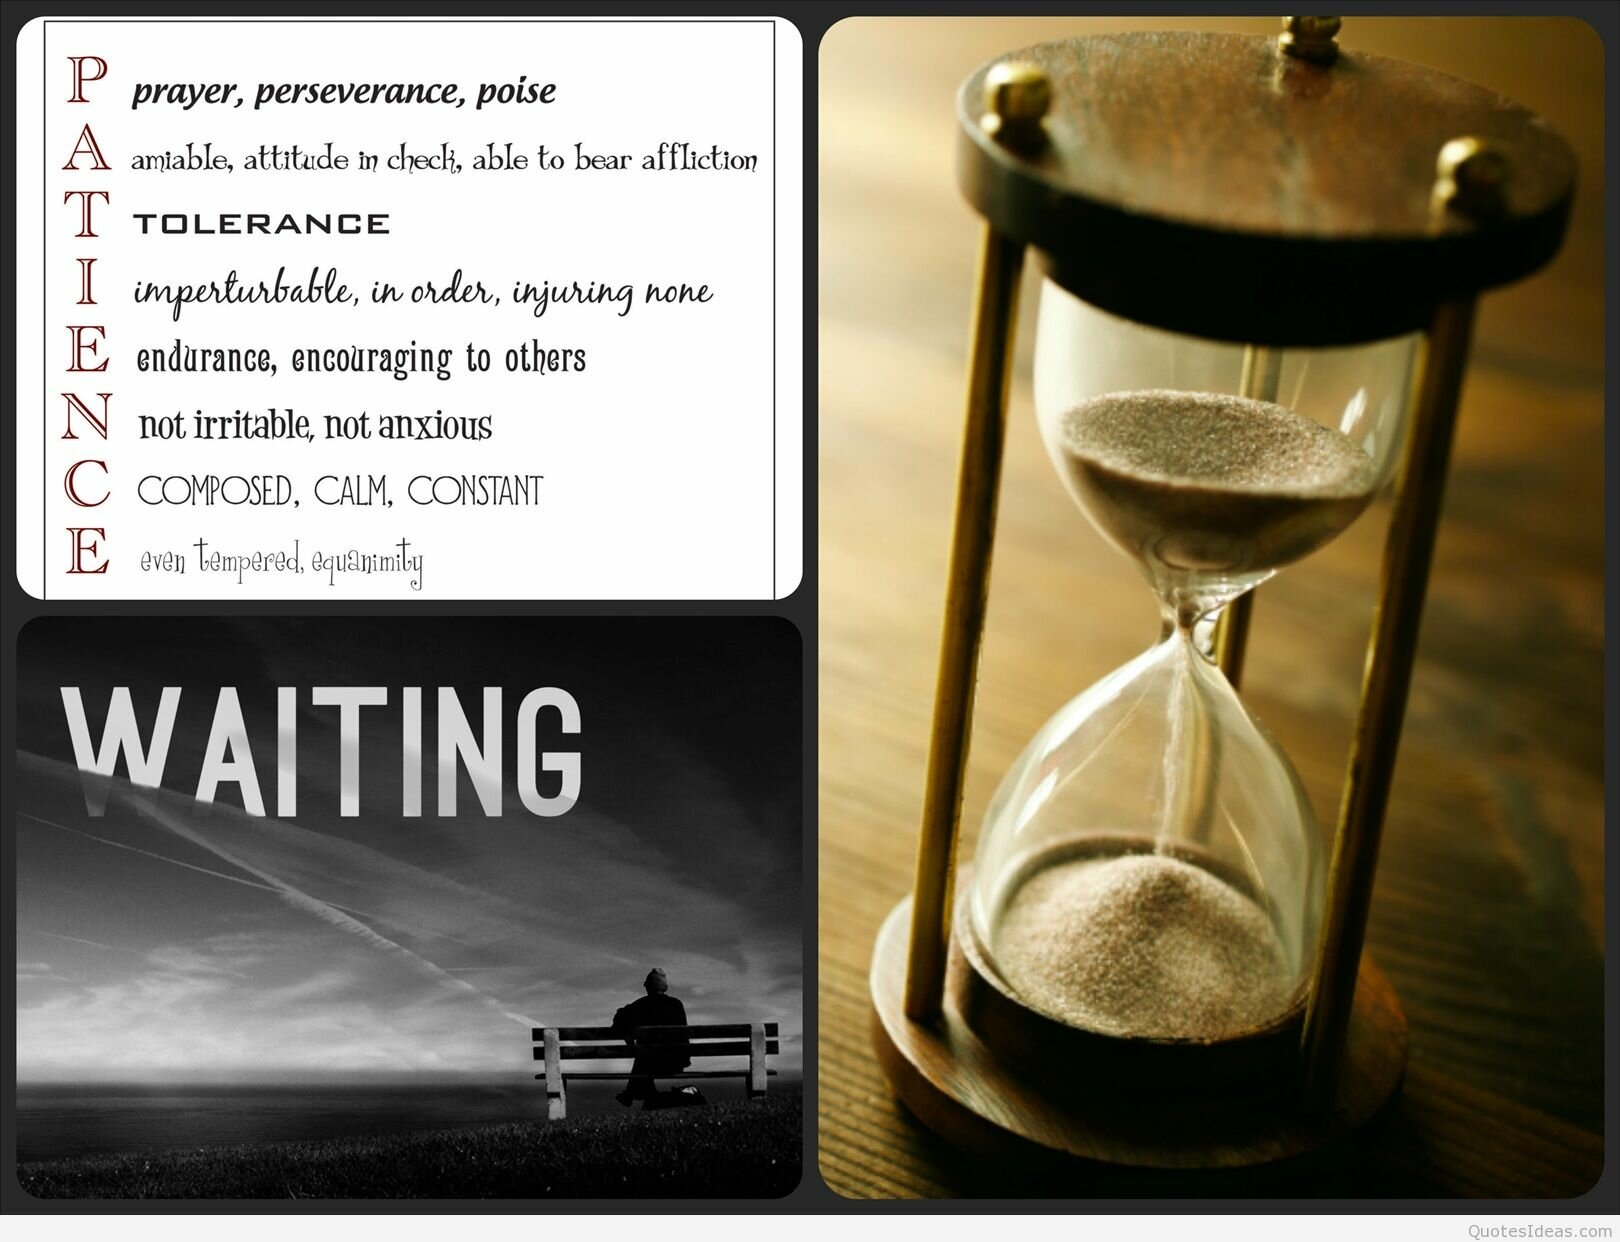 Waiting patience quote wallpaper hd